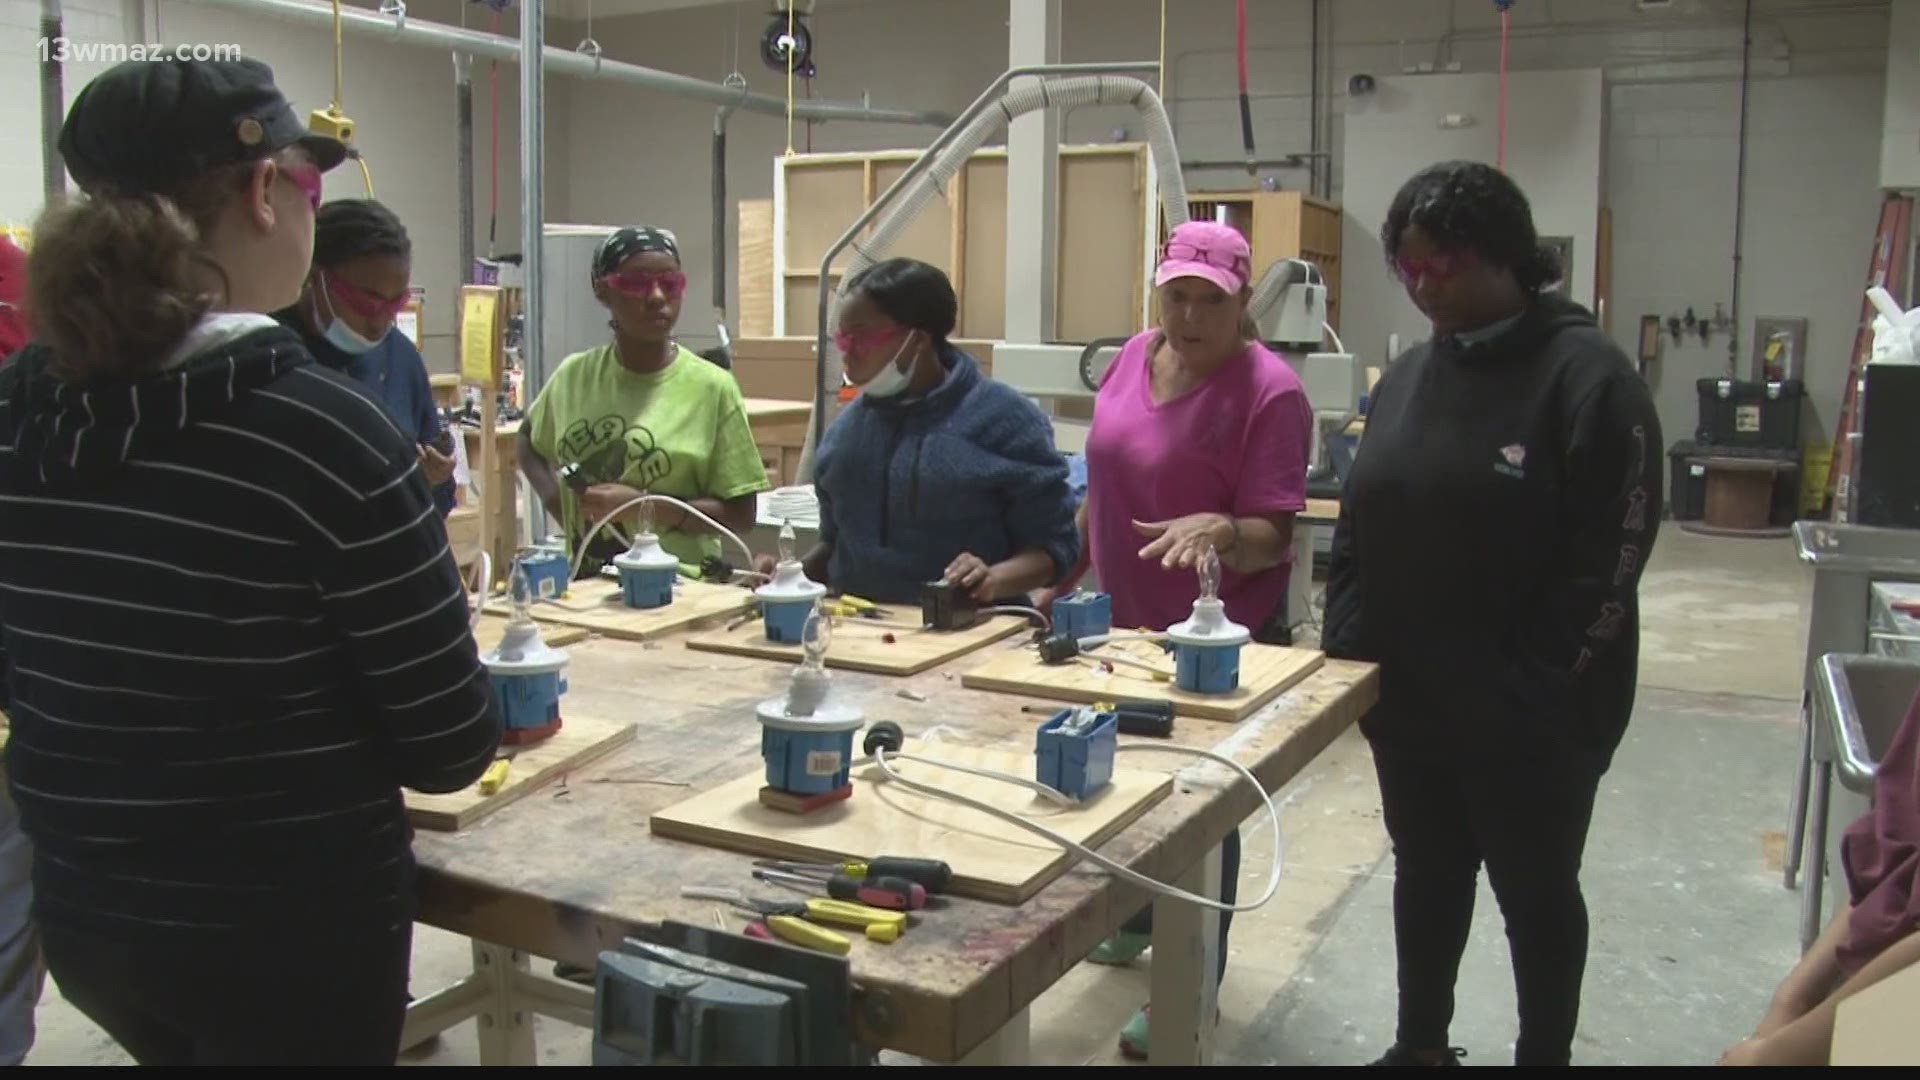 Campers are learning fundamental skills in carpentry, welding, plumbing and operating heavy machinery.